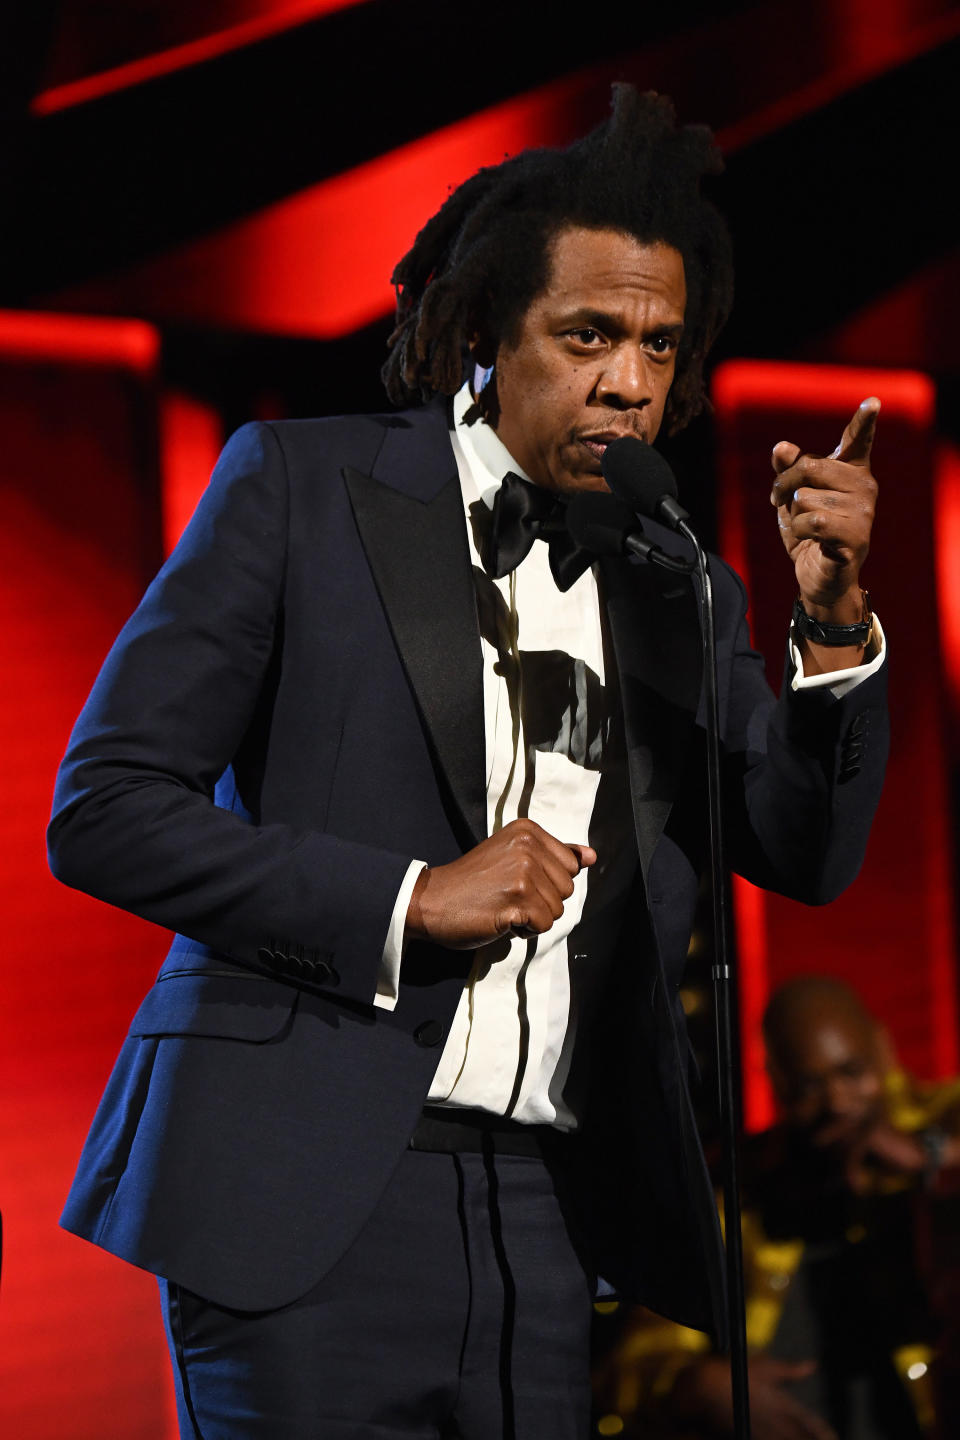 Jay-Z speaking at a formal event